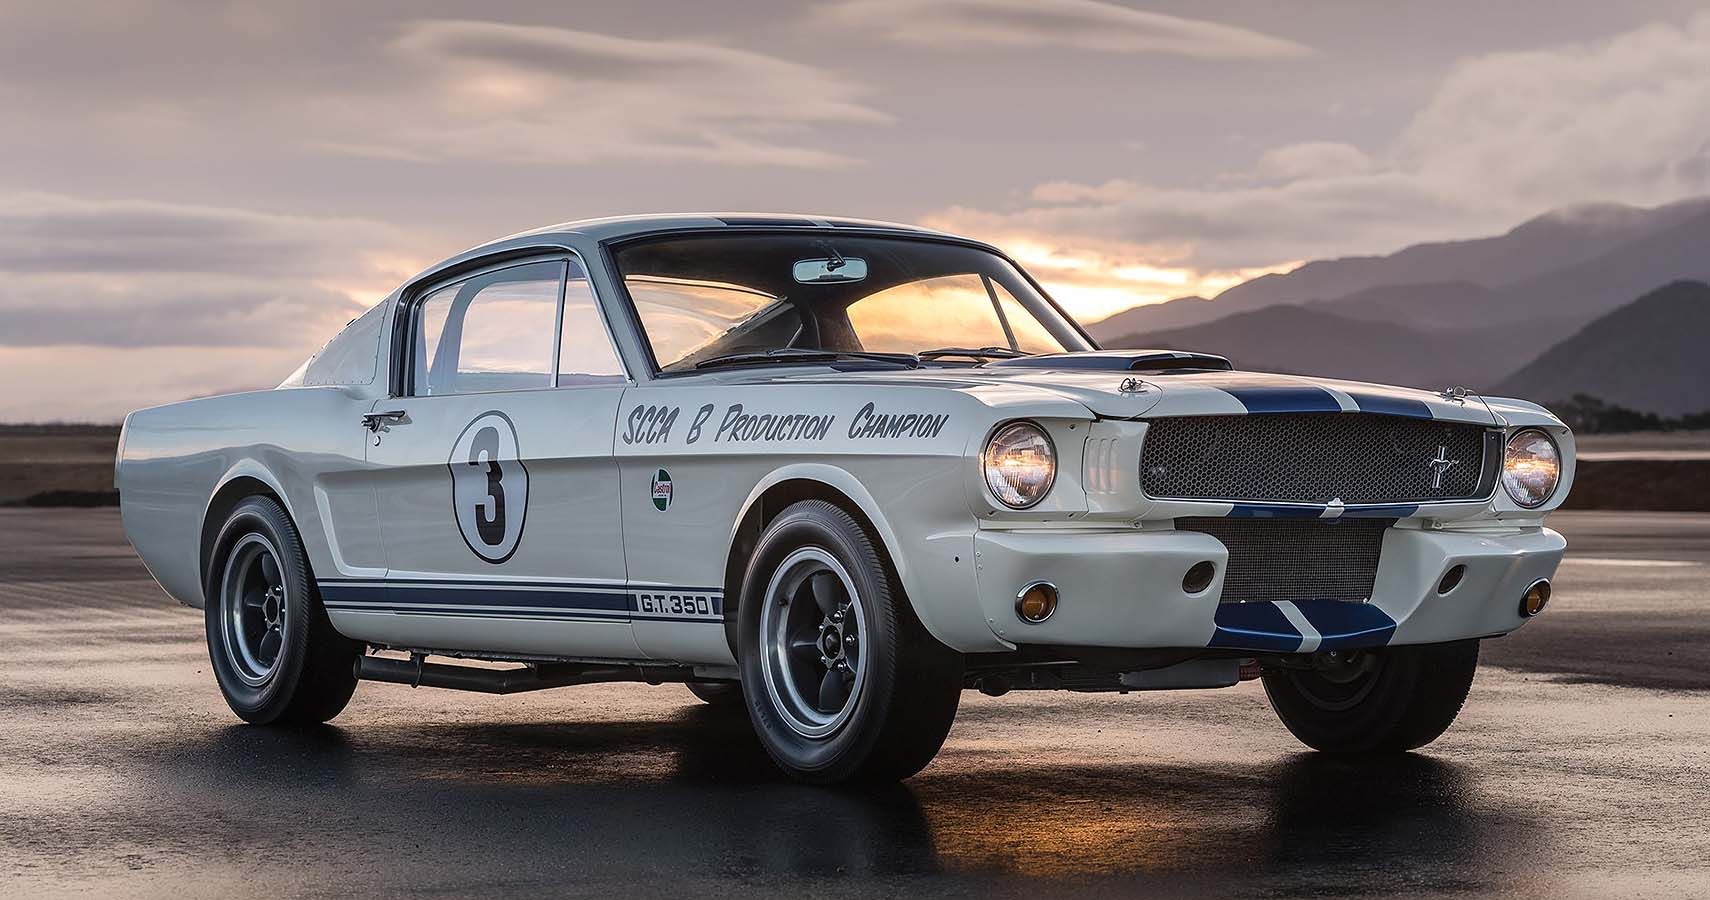 The 1965 Shelby GT 350 R